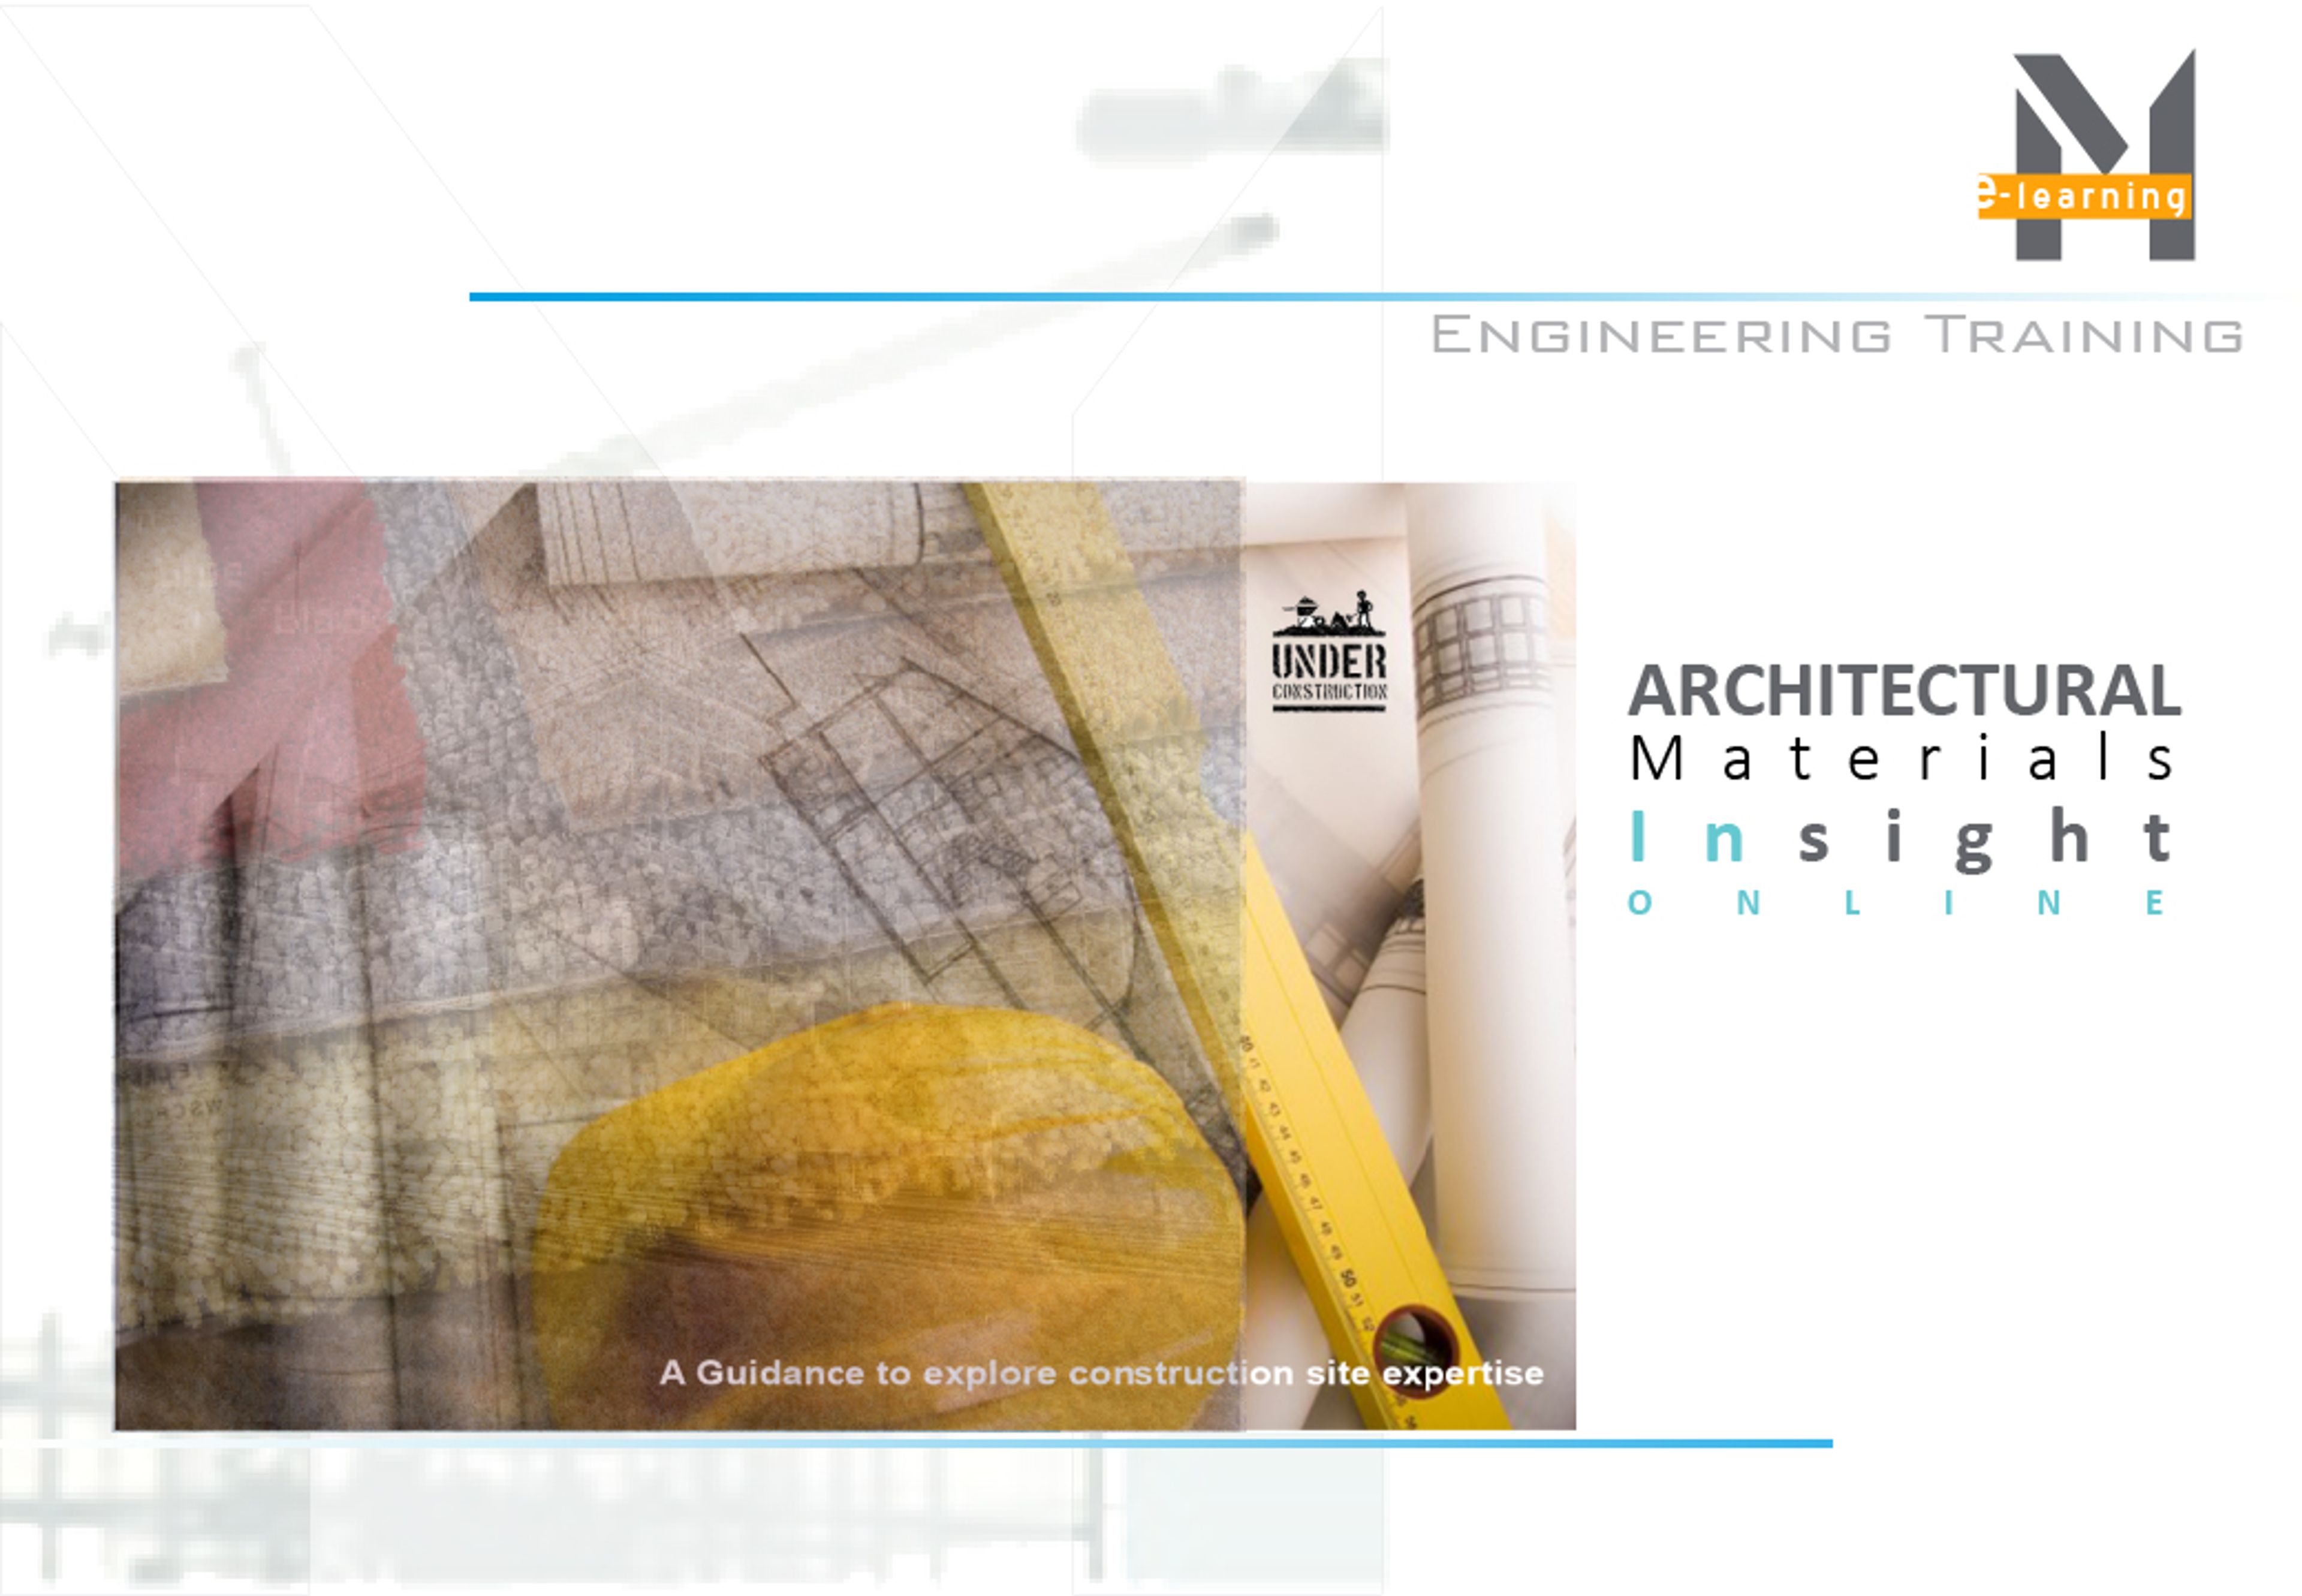 ARCHITECTURAL MATERIALS INSIGHT